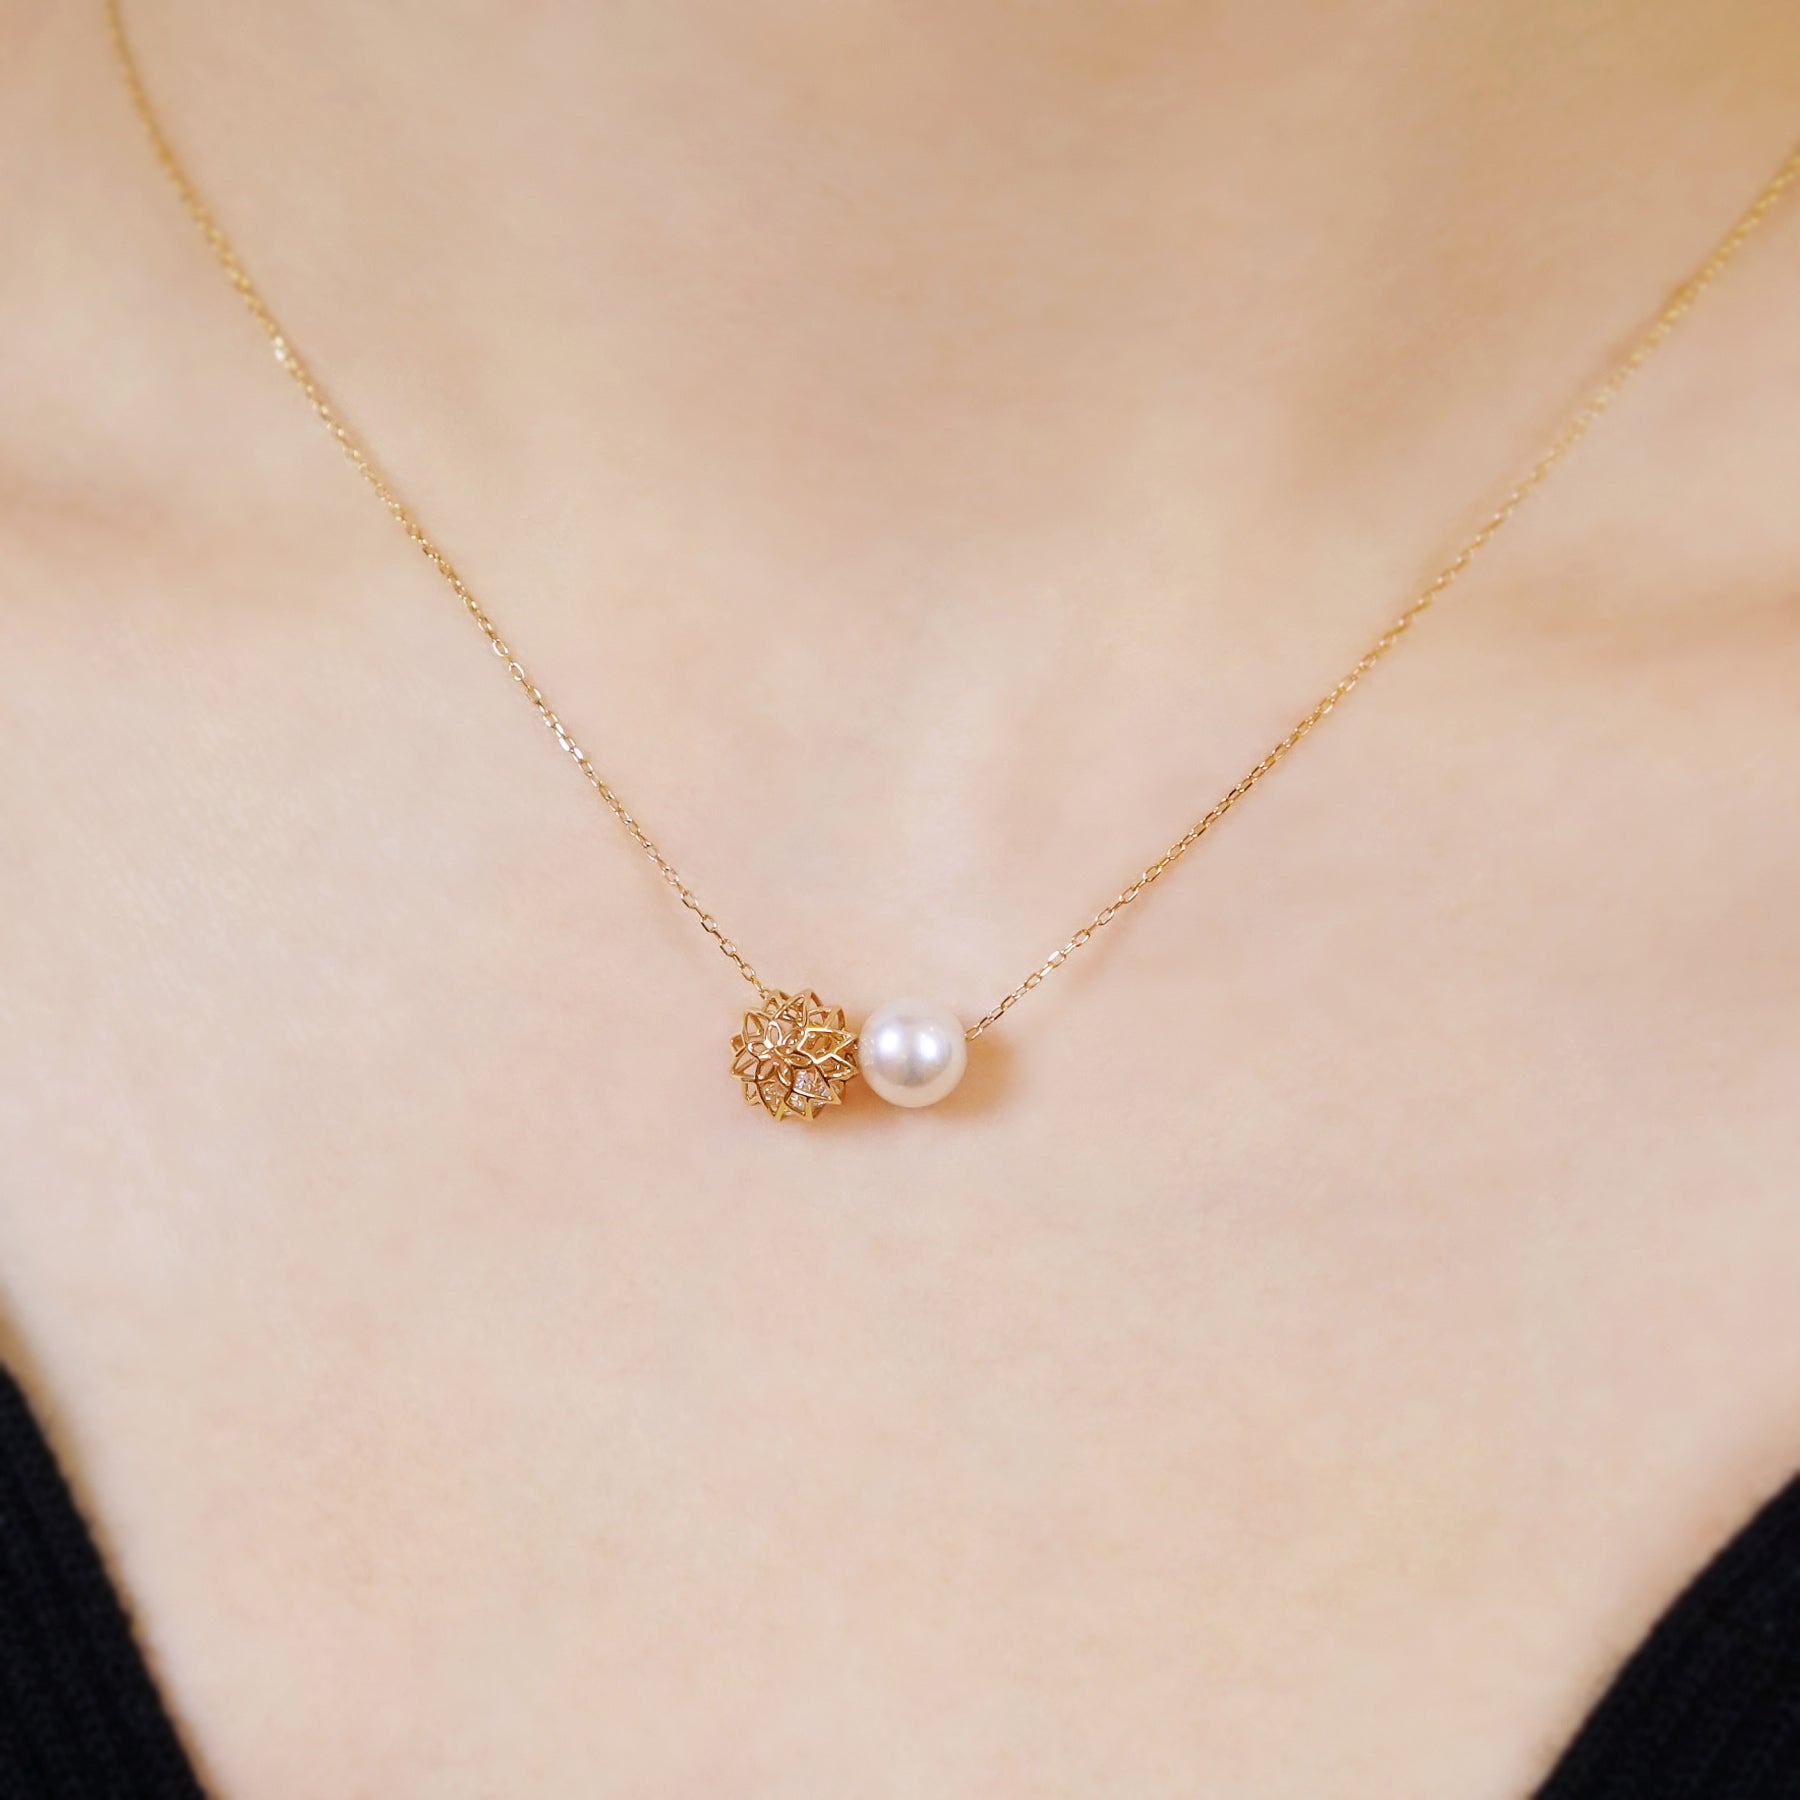 [Pannier] 10K Yellow Gold Pearl Flower Shaped Necklace - Model Image